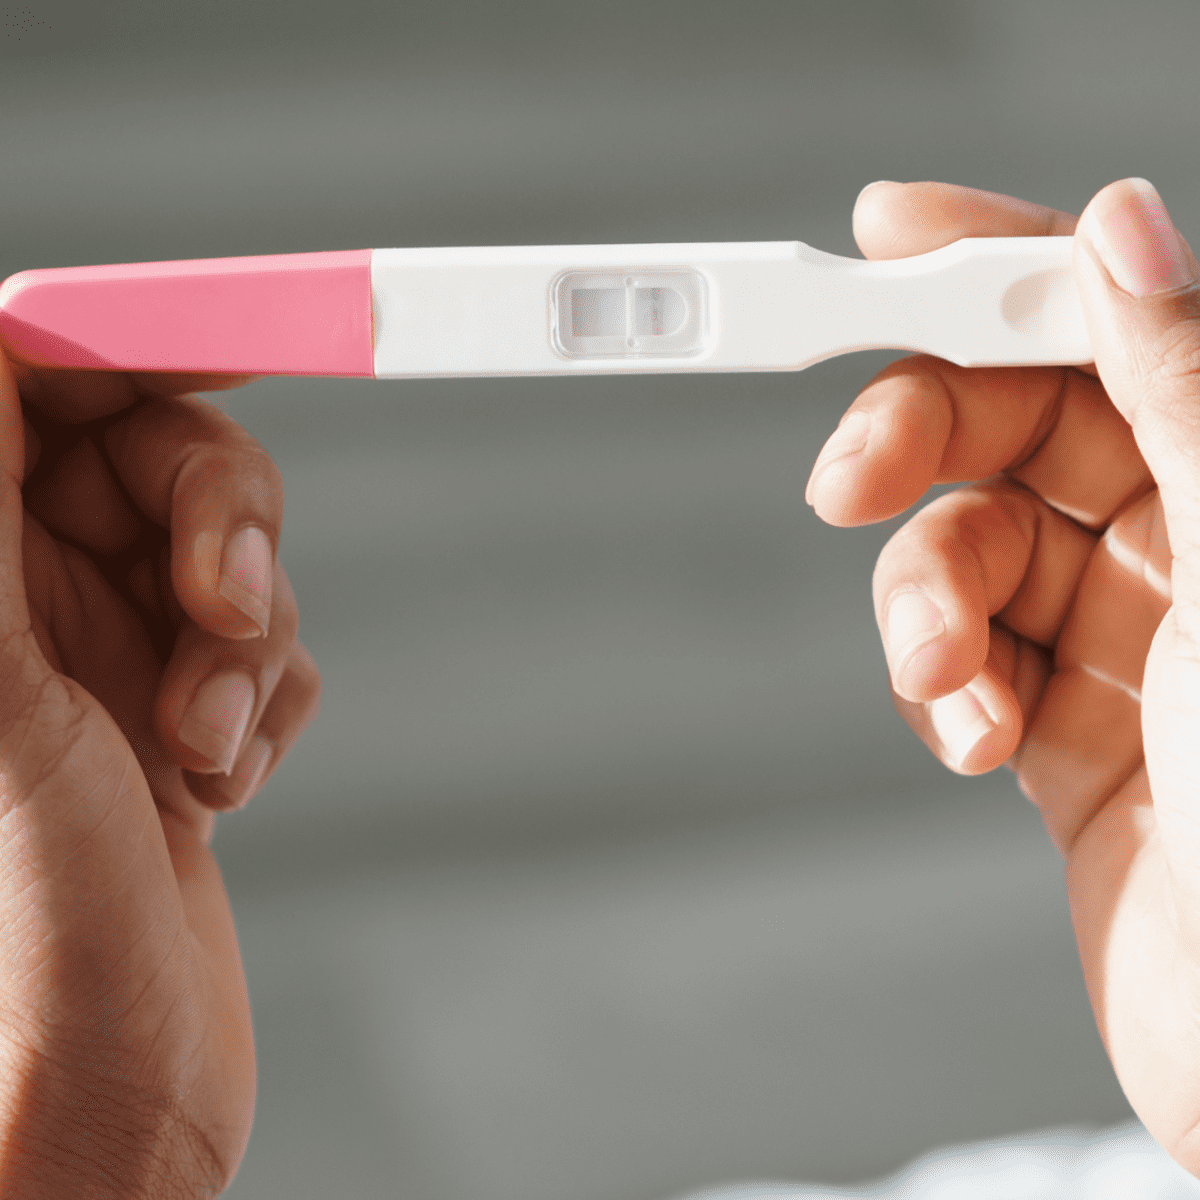 Nausea and Other Pregnancy Symptoms With a Negative Test image